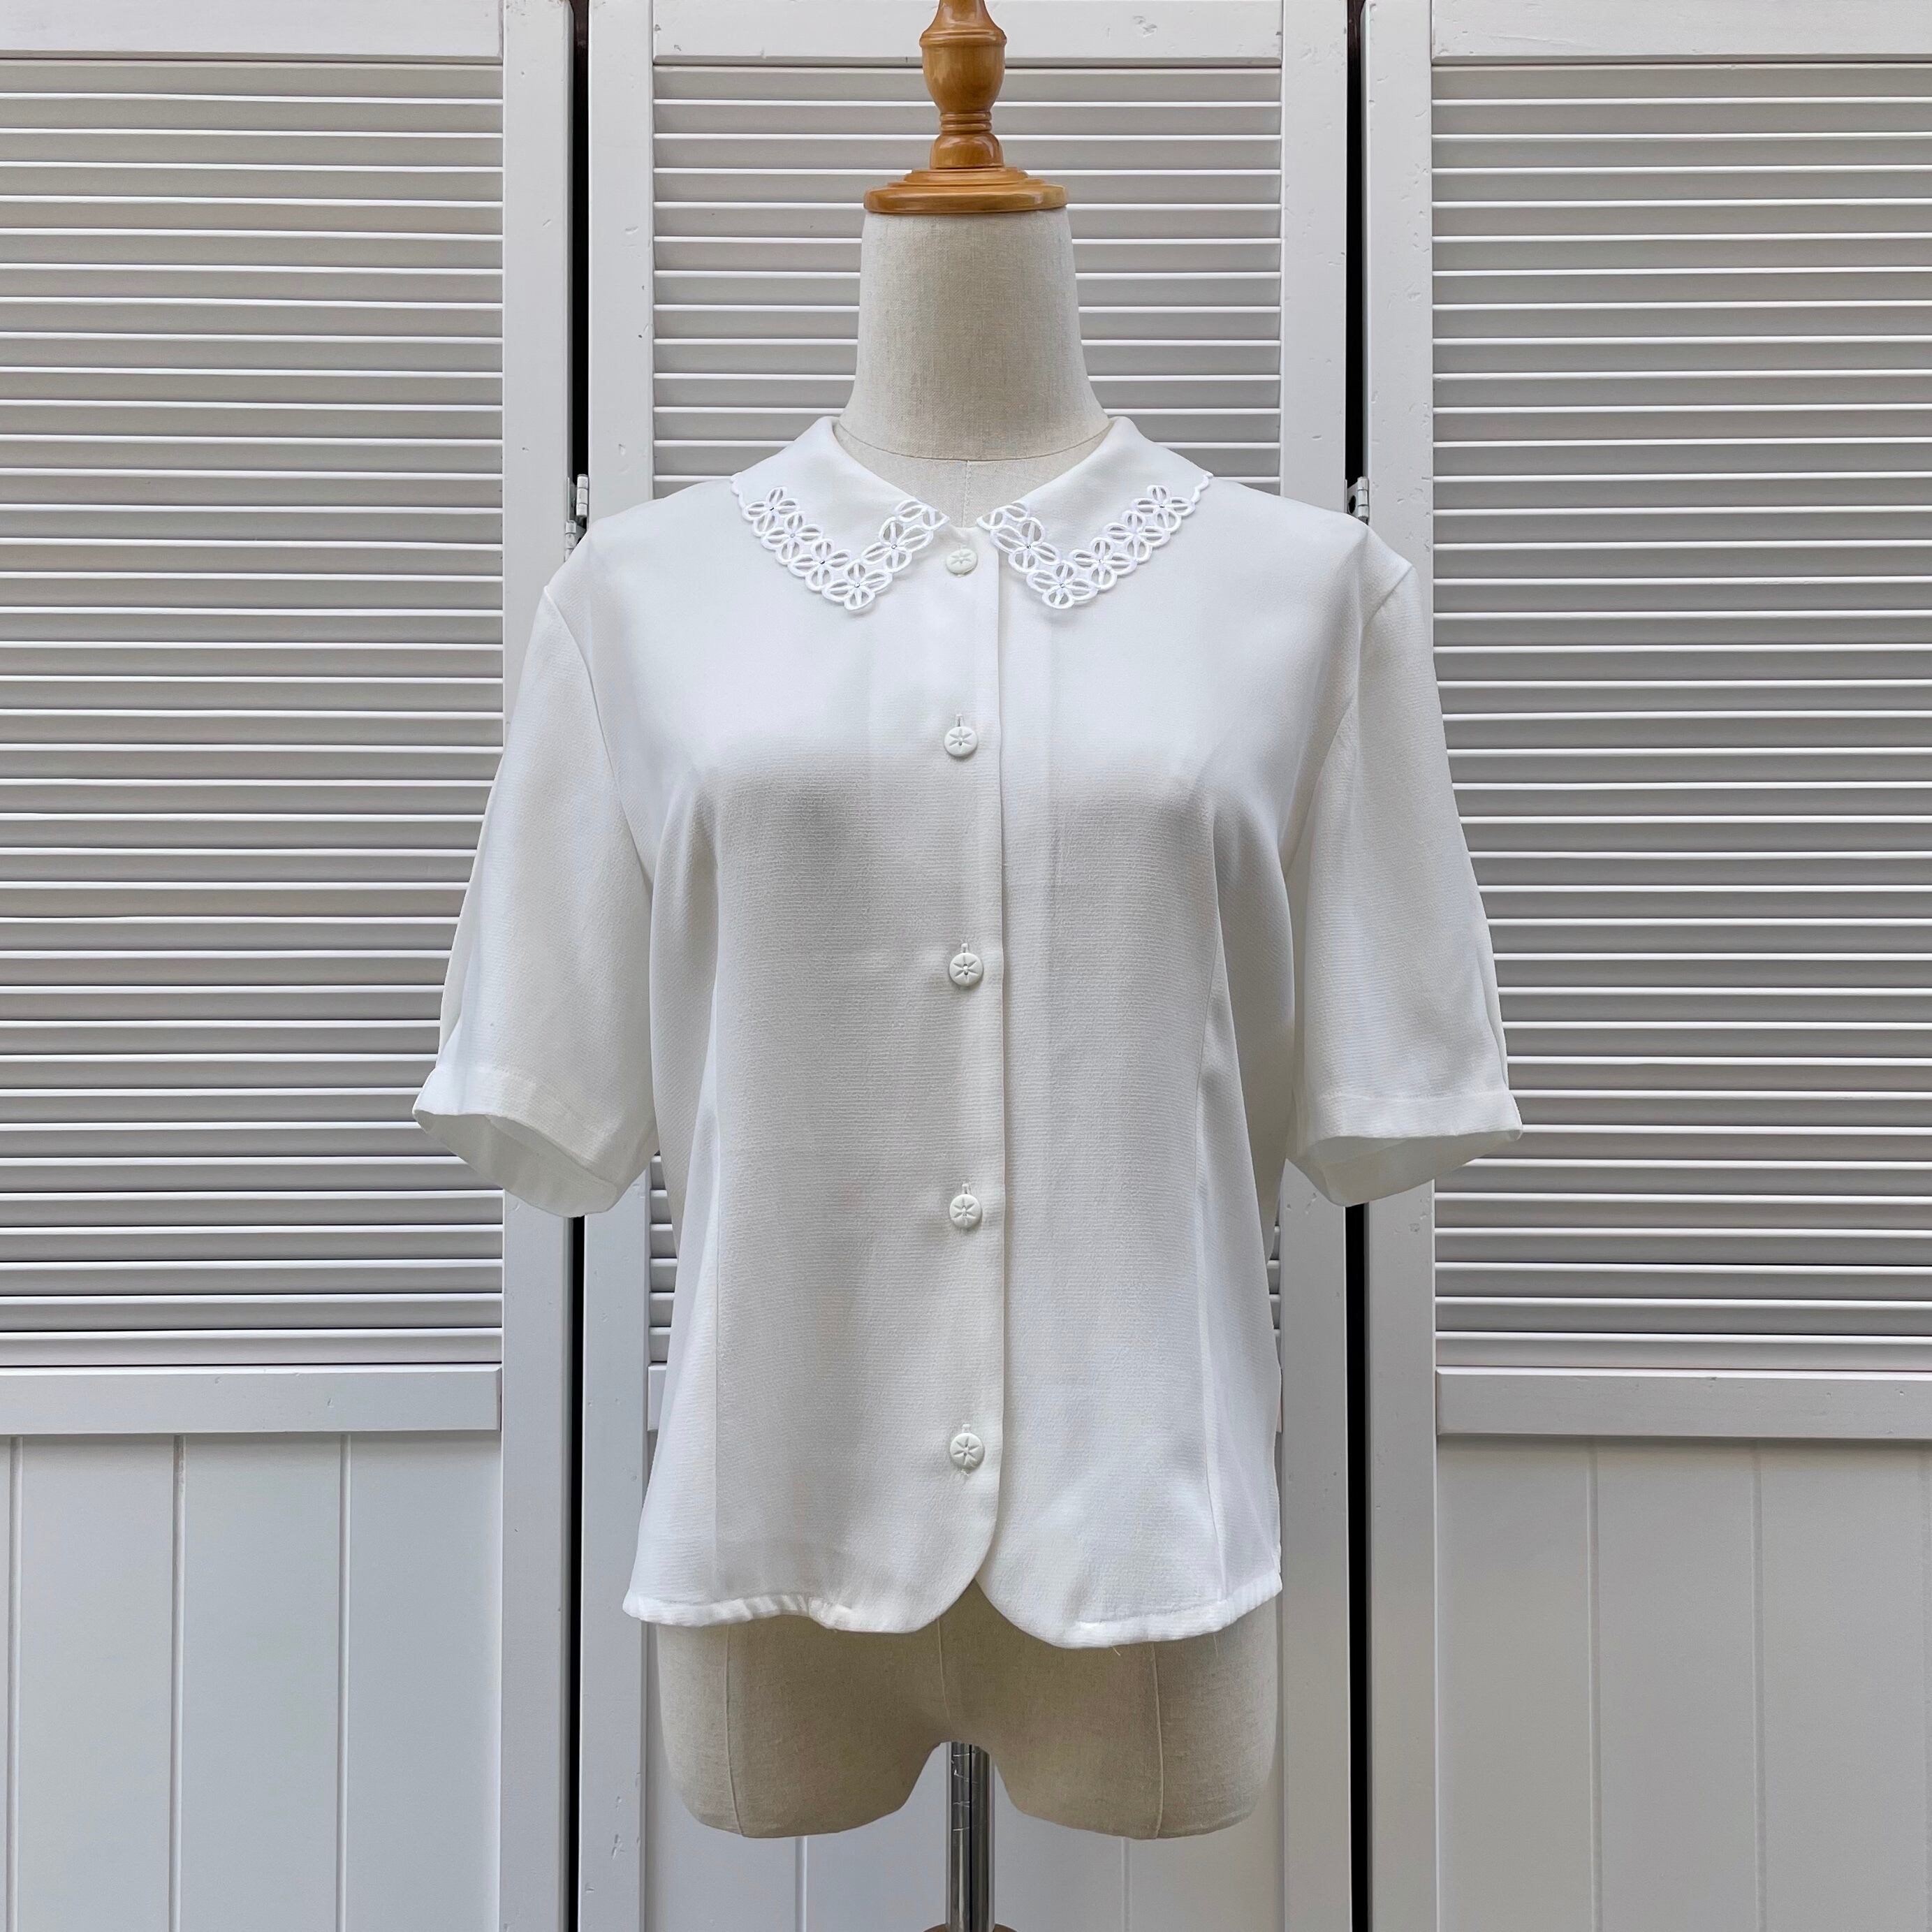 clover cutwork embroidery white blouse 〈レディース古着 クローバー